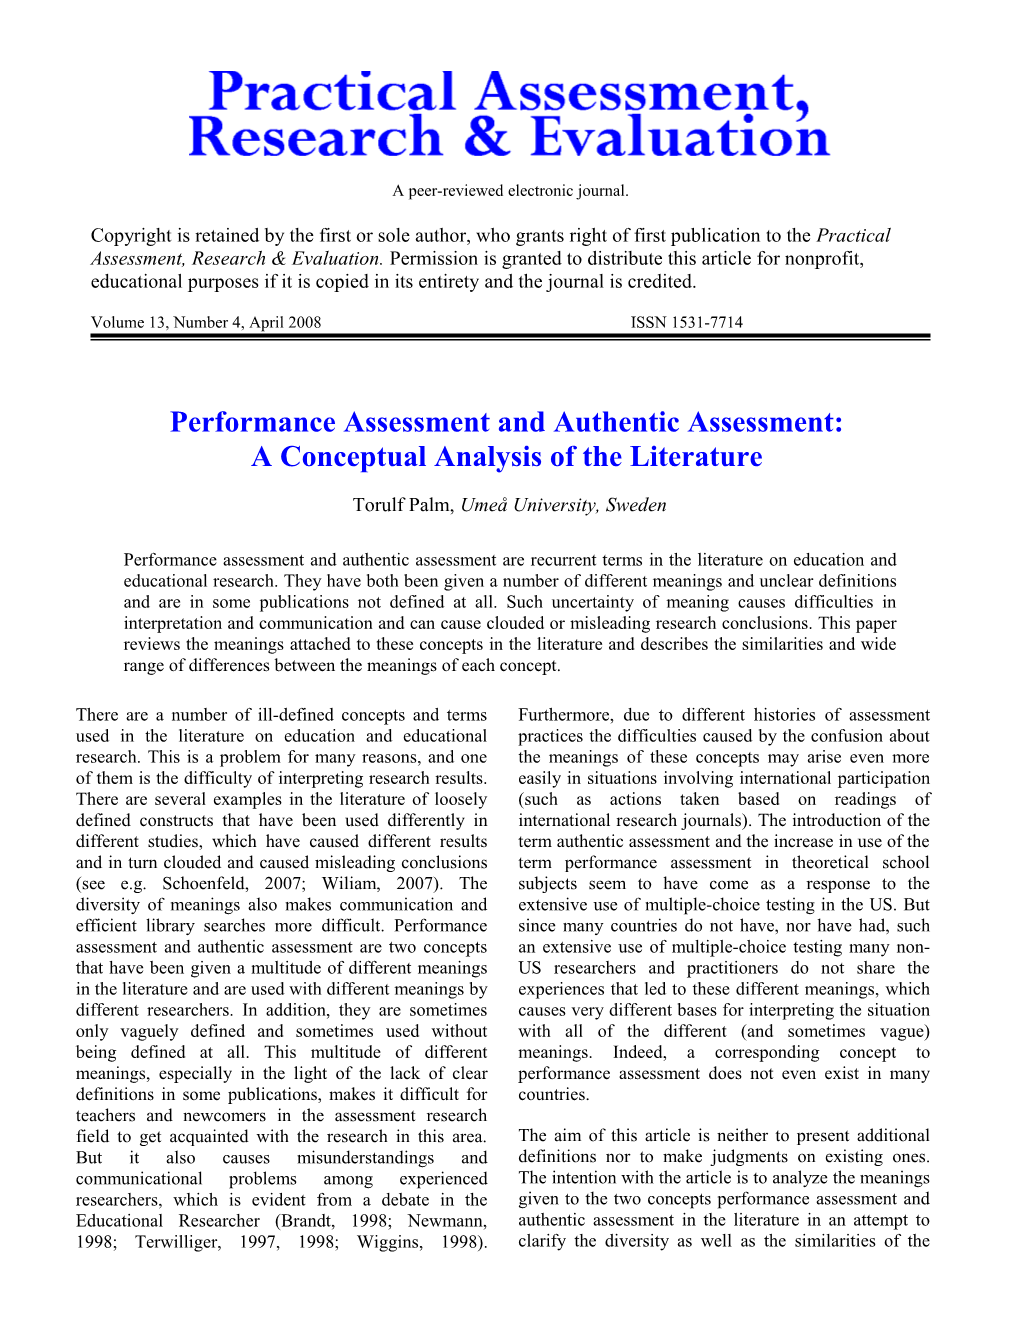 Performance Assessment and Authentic Assessment: a Conceptual Analysis of the Literature